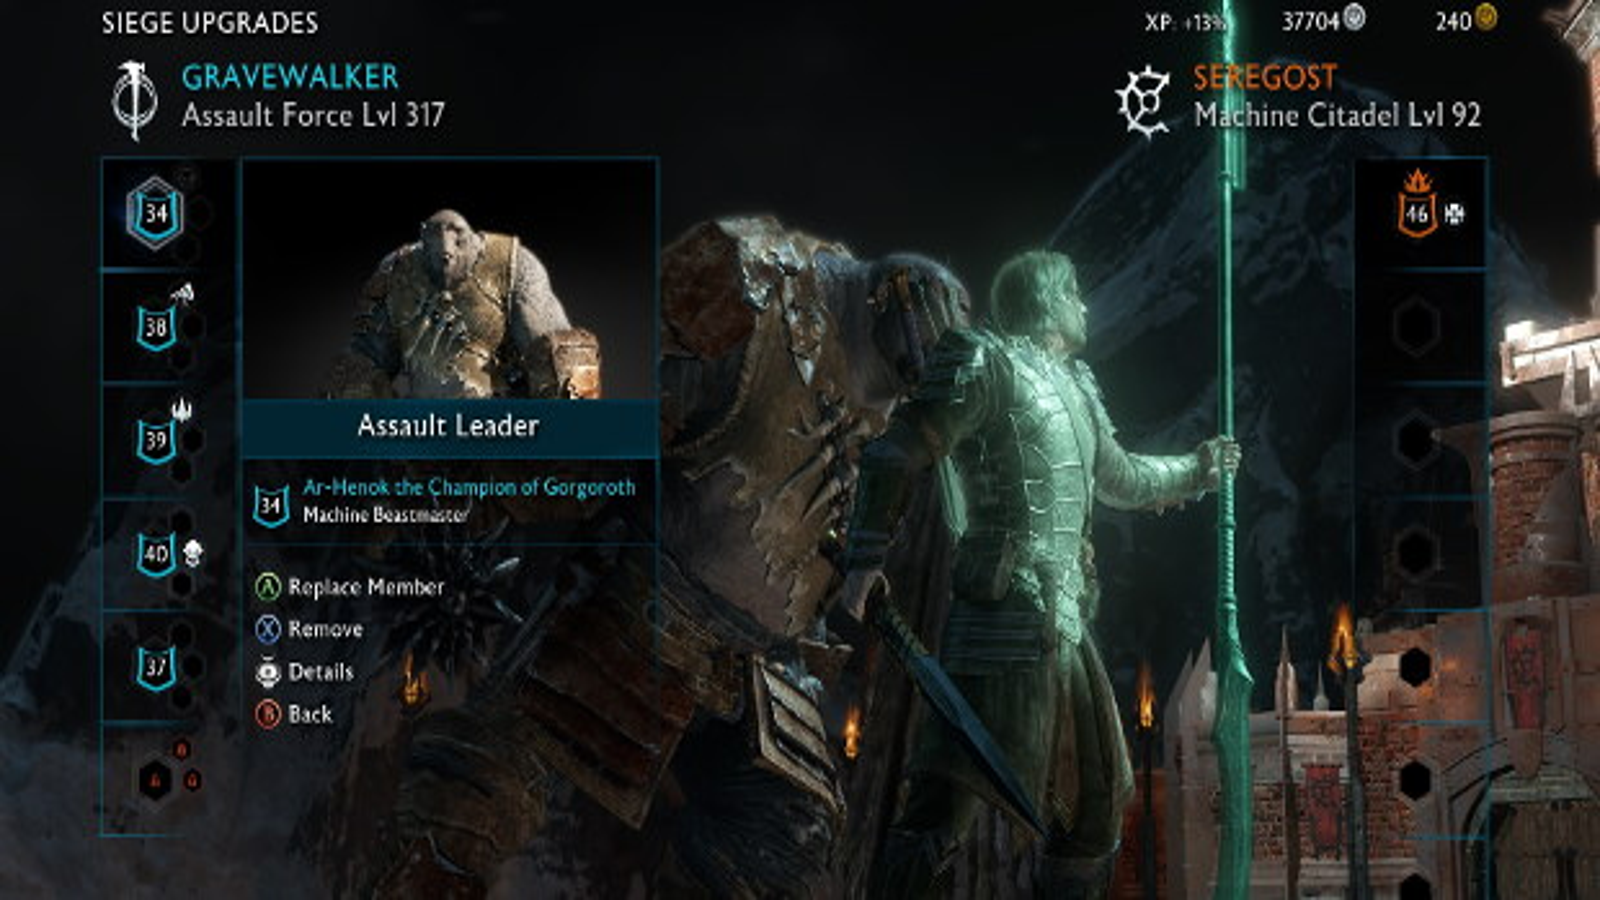 Shadow of War The Shadow Wars - How to Defend Your Fortress, How